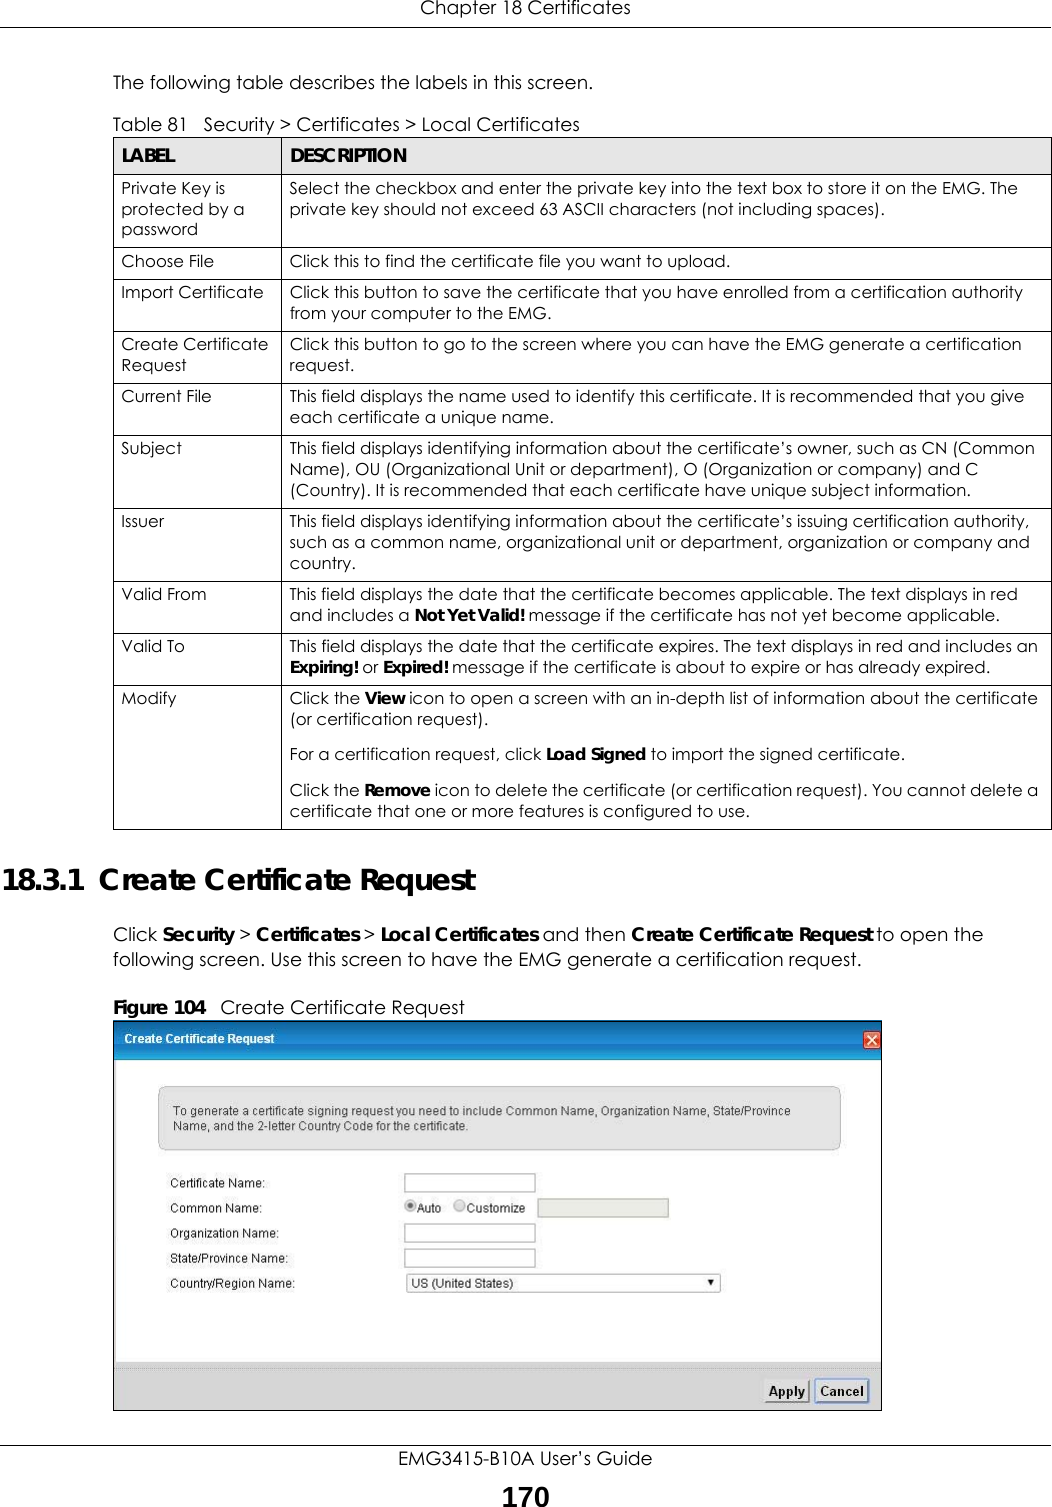 Chapter 18 CertificatesEMG3415-B10A User’s Guide170The following table describes the labels in this screen. 18.3.1  Create Certificate Request Click Security &gt; Certificates &gt; Local Certificates and then Create Certificate Request to open the following screen. Use this screen to have the EMG generate a certification request.Figure 104   Create Certificate RequestTable 81   Security &gt; Certificates &gt; Local CertificatesLABEL DESCRIPTIONPrivate Key is protected by a passwordSelect the checkbox and enter the private key into the text box to store it on the EMG. The private key should not exceed 63 ASCII characters (not including spaces). Choose File Click this to find the certificate file you want to upload. Import Certificate Click this button to save the certificate that you have enrolled from a certification authority from your computer to the EMG.Create Certificate RequestClick this button to go to the screen where you can have the EMG generate a certification request.Current File This field displays the name used to identify this certificate. It is recommended that you give each certificate a unique name. Subject This field displays identifying information about the certificate’s owner, such as CN (Common Name), OU (Organizational Unit or department), O (Organization or company) and C (Country). It is recommended that each certificate have unique subject information. Issuer This field displays identifying information about the certificate’s issuing certification authority, such as a common name, organizational unit or department, organization or company and country.Valid From This field displays the date that the certificate becomes applicable. The text displays in red and includes a Not Yet Valid! message if the certificate has not yet become applicable.Valid To This field displays the date that the certificate expires. The text displays in red and includes an Expiring! or Expired! message if the certificate is about to expire or has already expired.Modify Click the View icon to open a screen with an in-depth list of information about the certificate (or certification request).For a certification request, click Load Signed to import the signed certificate.Click the Remove icon to delete the certificate (or certification request). You cannot delete a certificate that one or more features is configured to use.